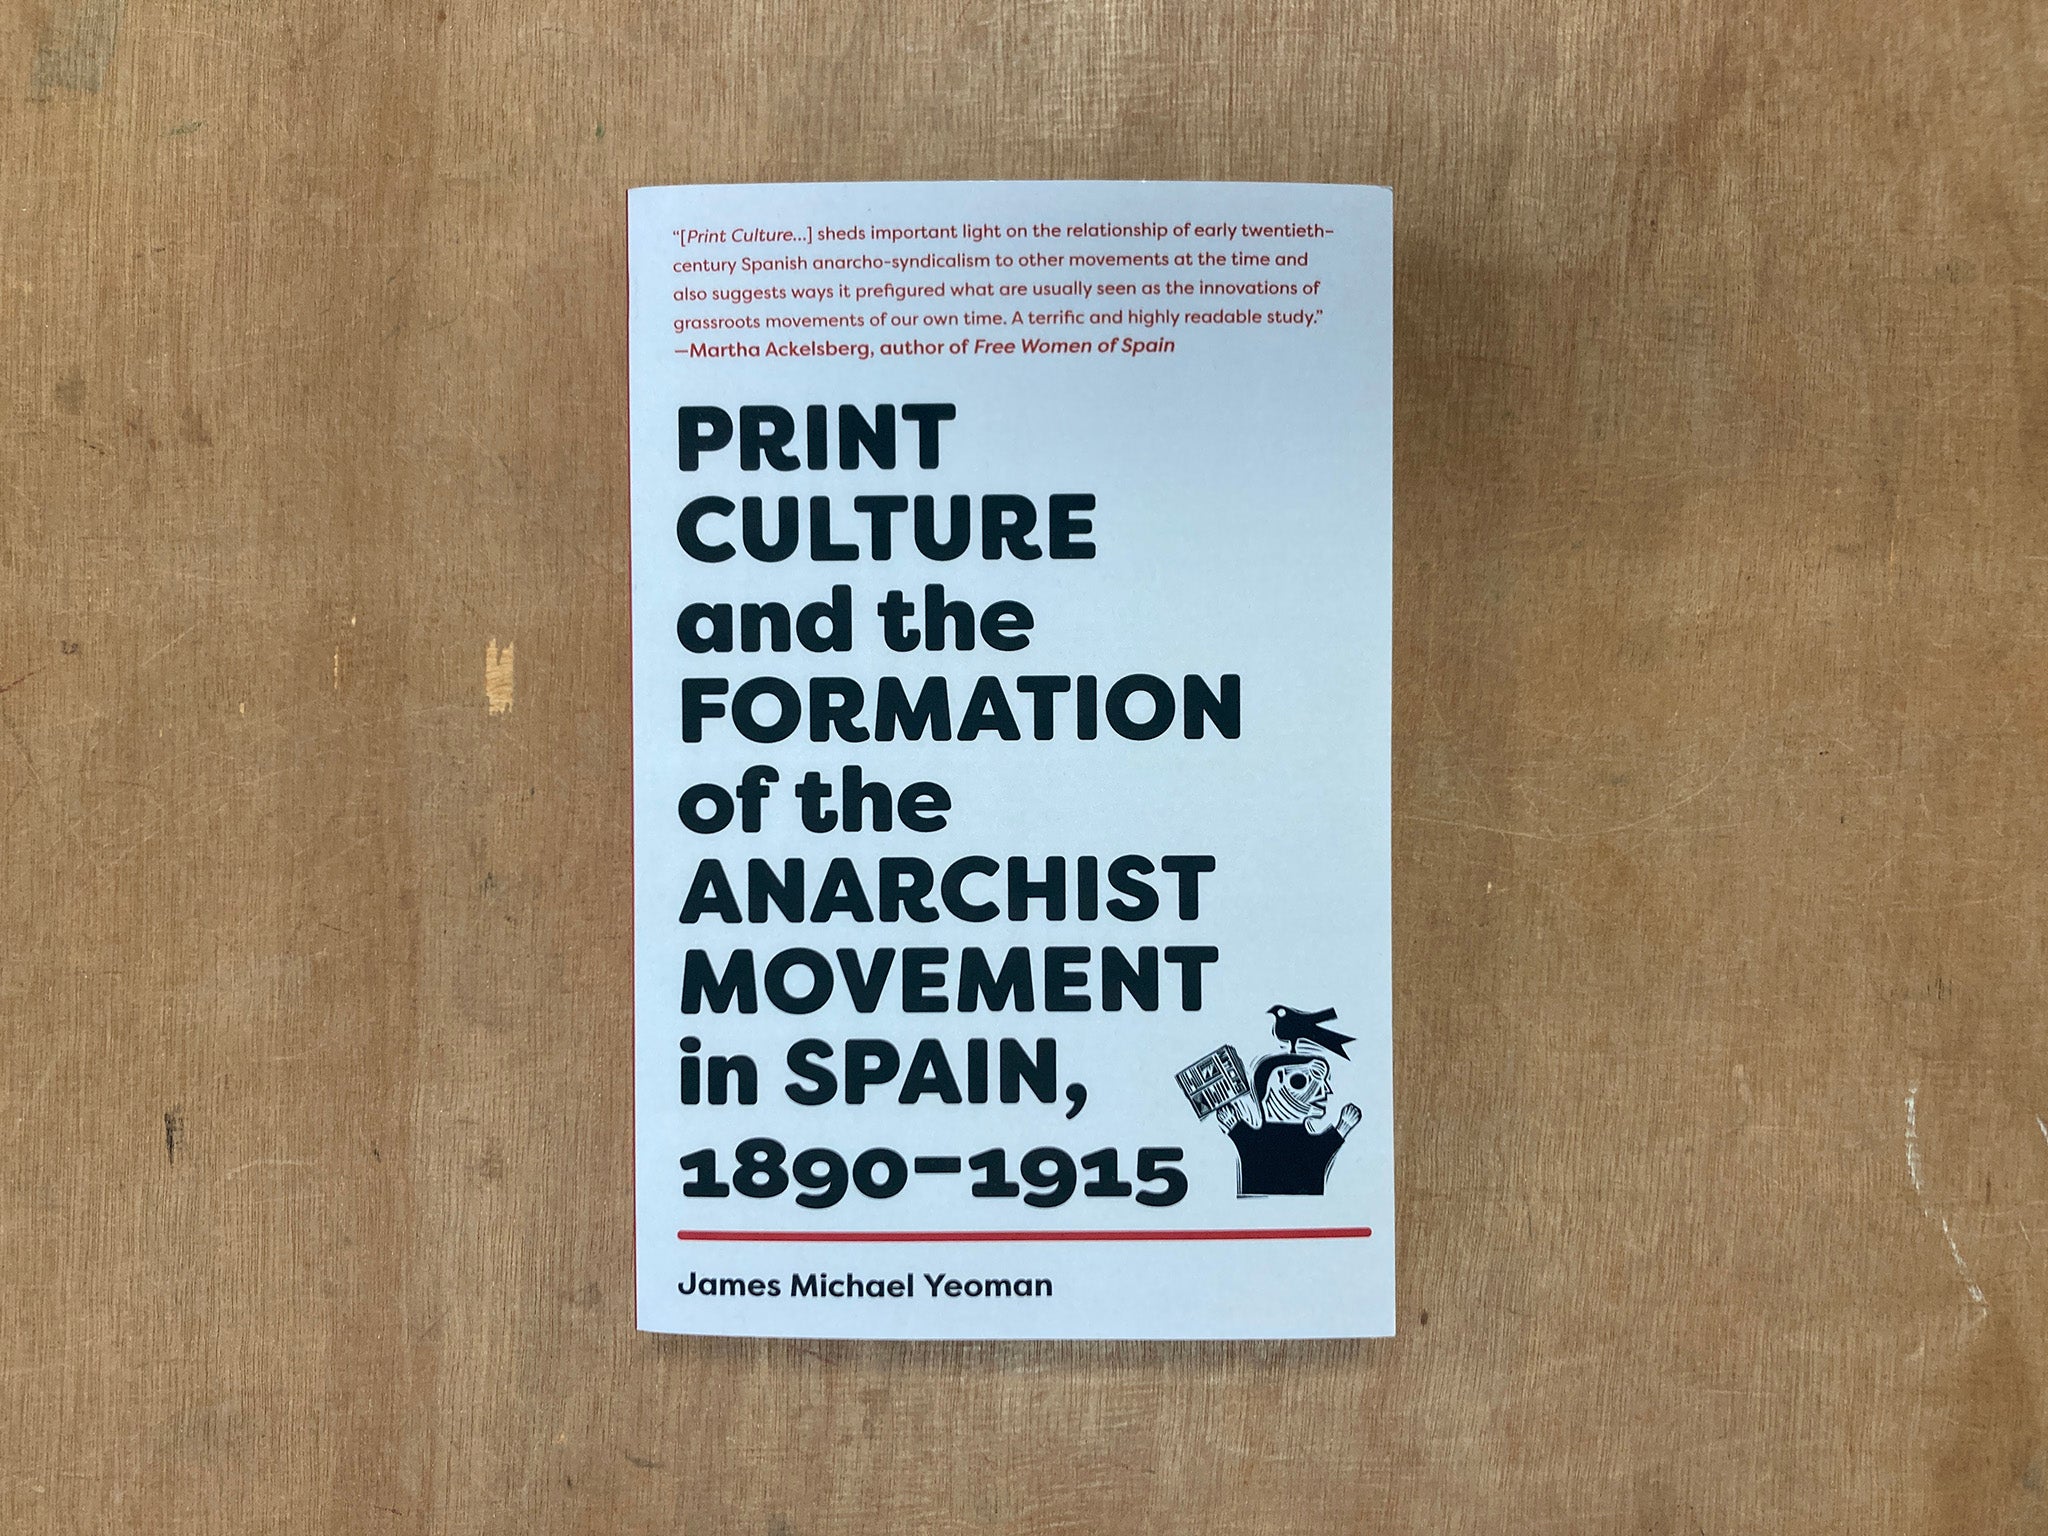 PRINT CULTURE AND THE FORMATION OF THE ANARCHIST MOVEMENT IN SPAIN, 1890–1915 by James Michael Yeoman